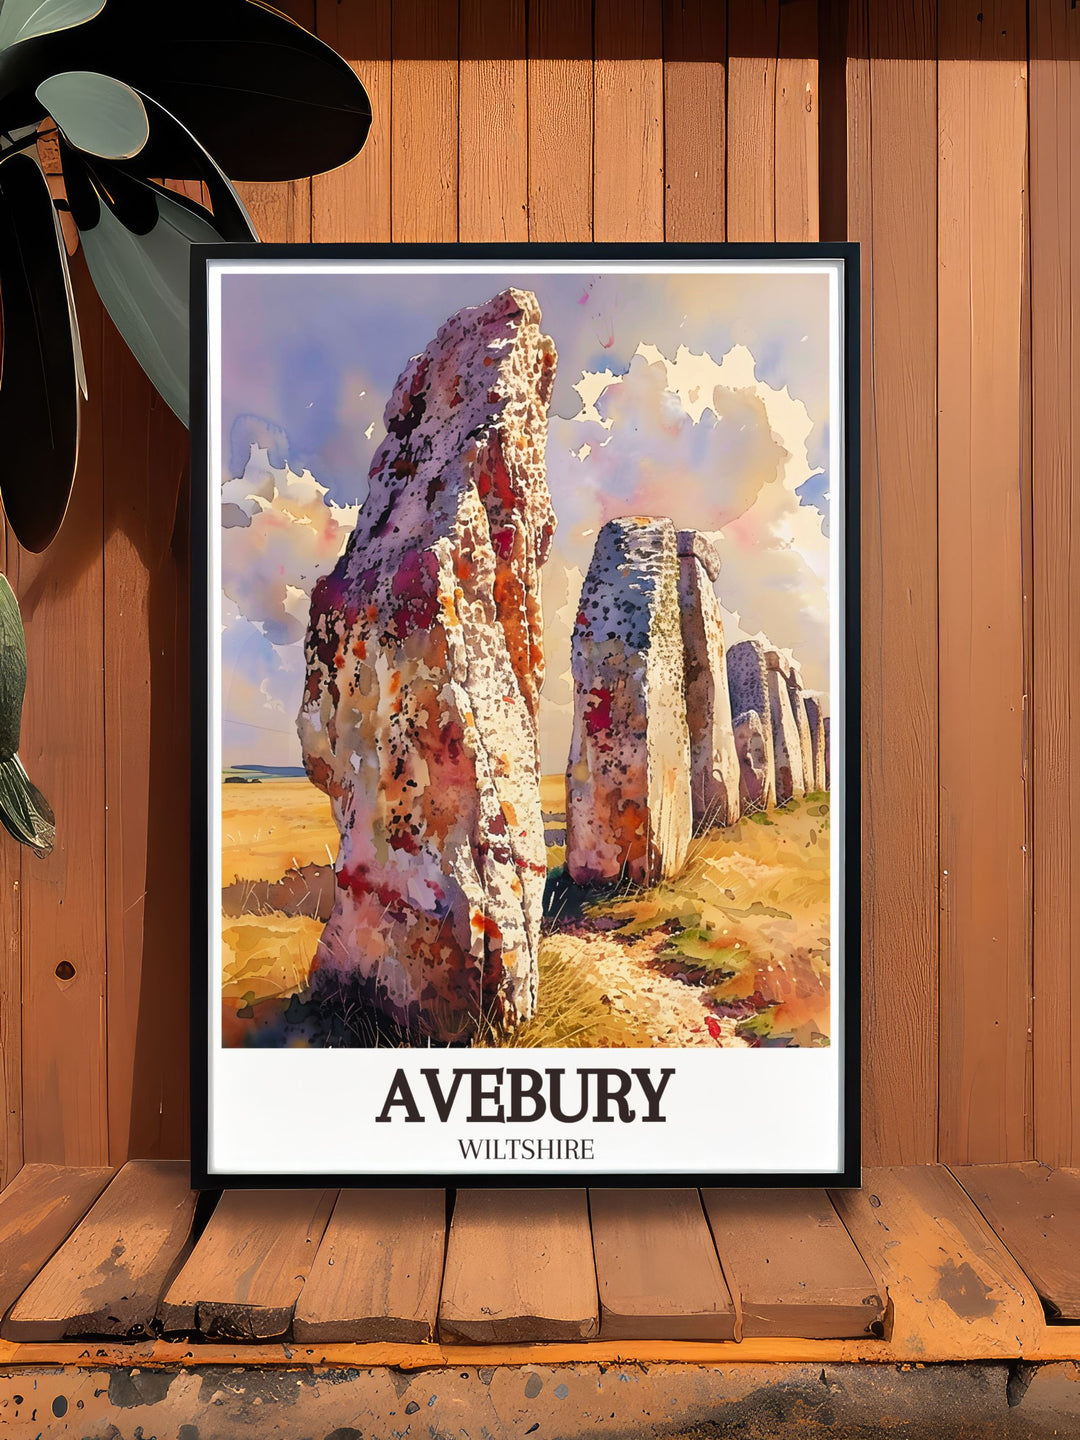 Capture the essence of Englands historical landmarks with this poster featuring Avebury Stone Circle and the North Wessex Downs, perfect for enhancing any living space with their scenic beauty.